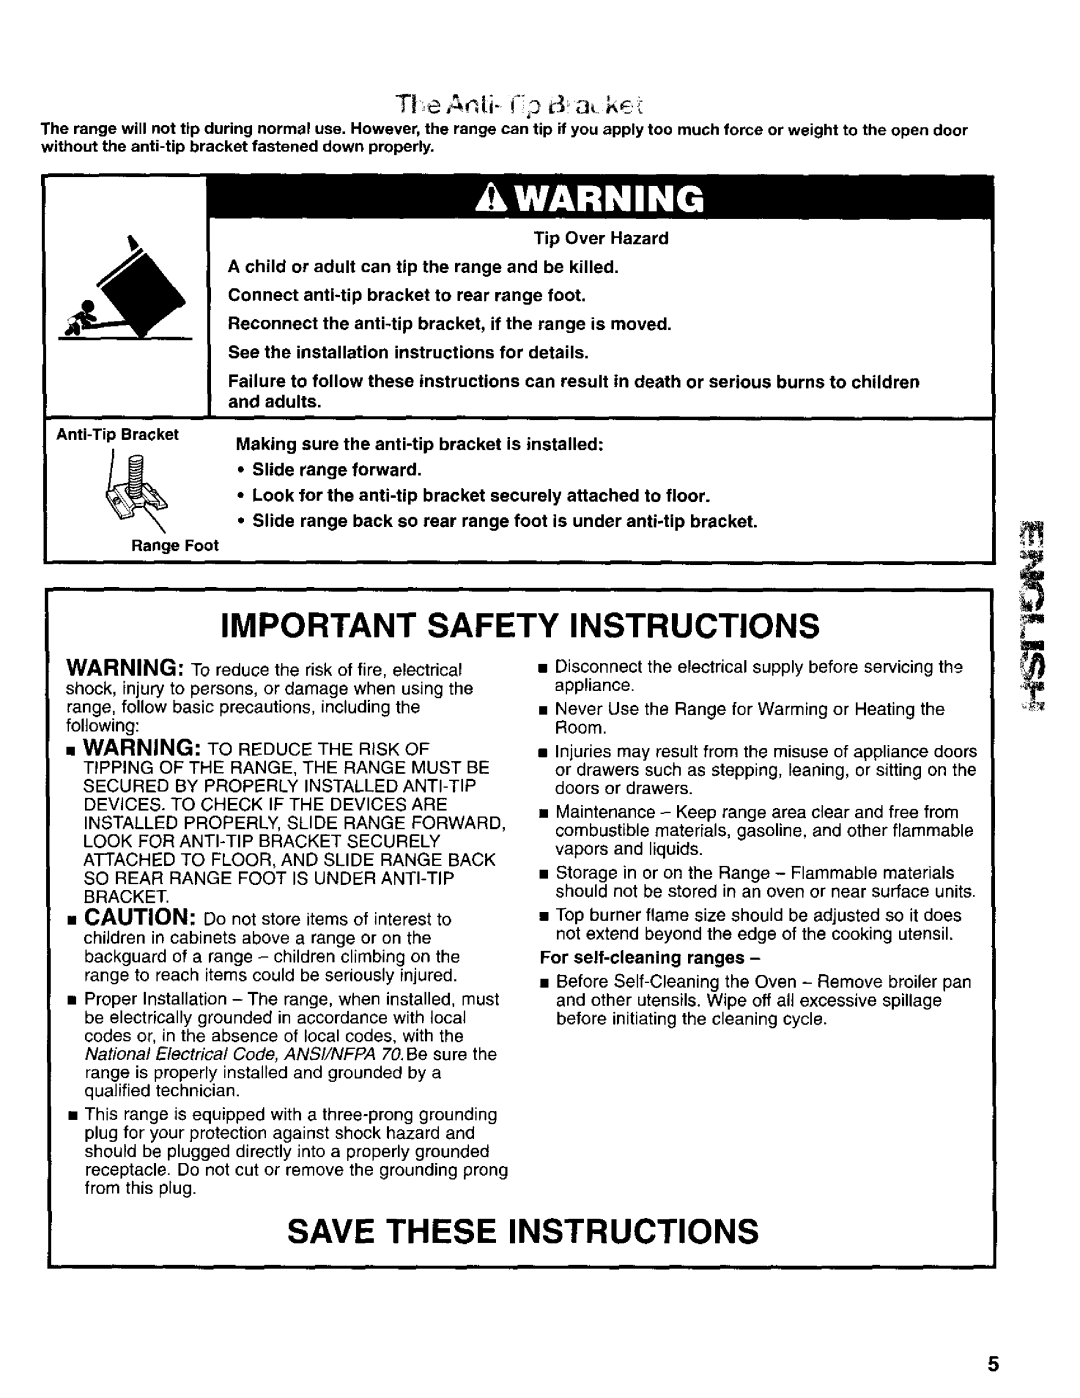 Kenmore 665.75025 Important Safety Instructions, Save These Instructions, Tip Over Hazard, Anti-TipBracket, Range Foot 